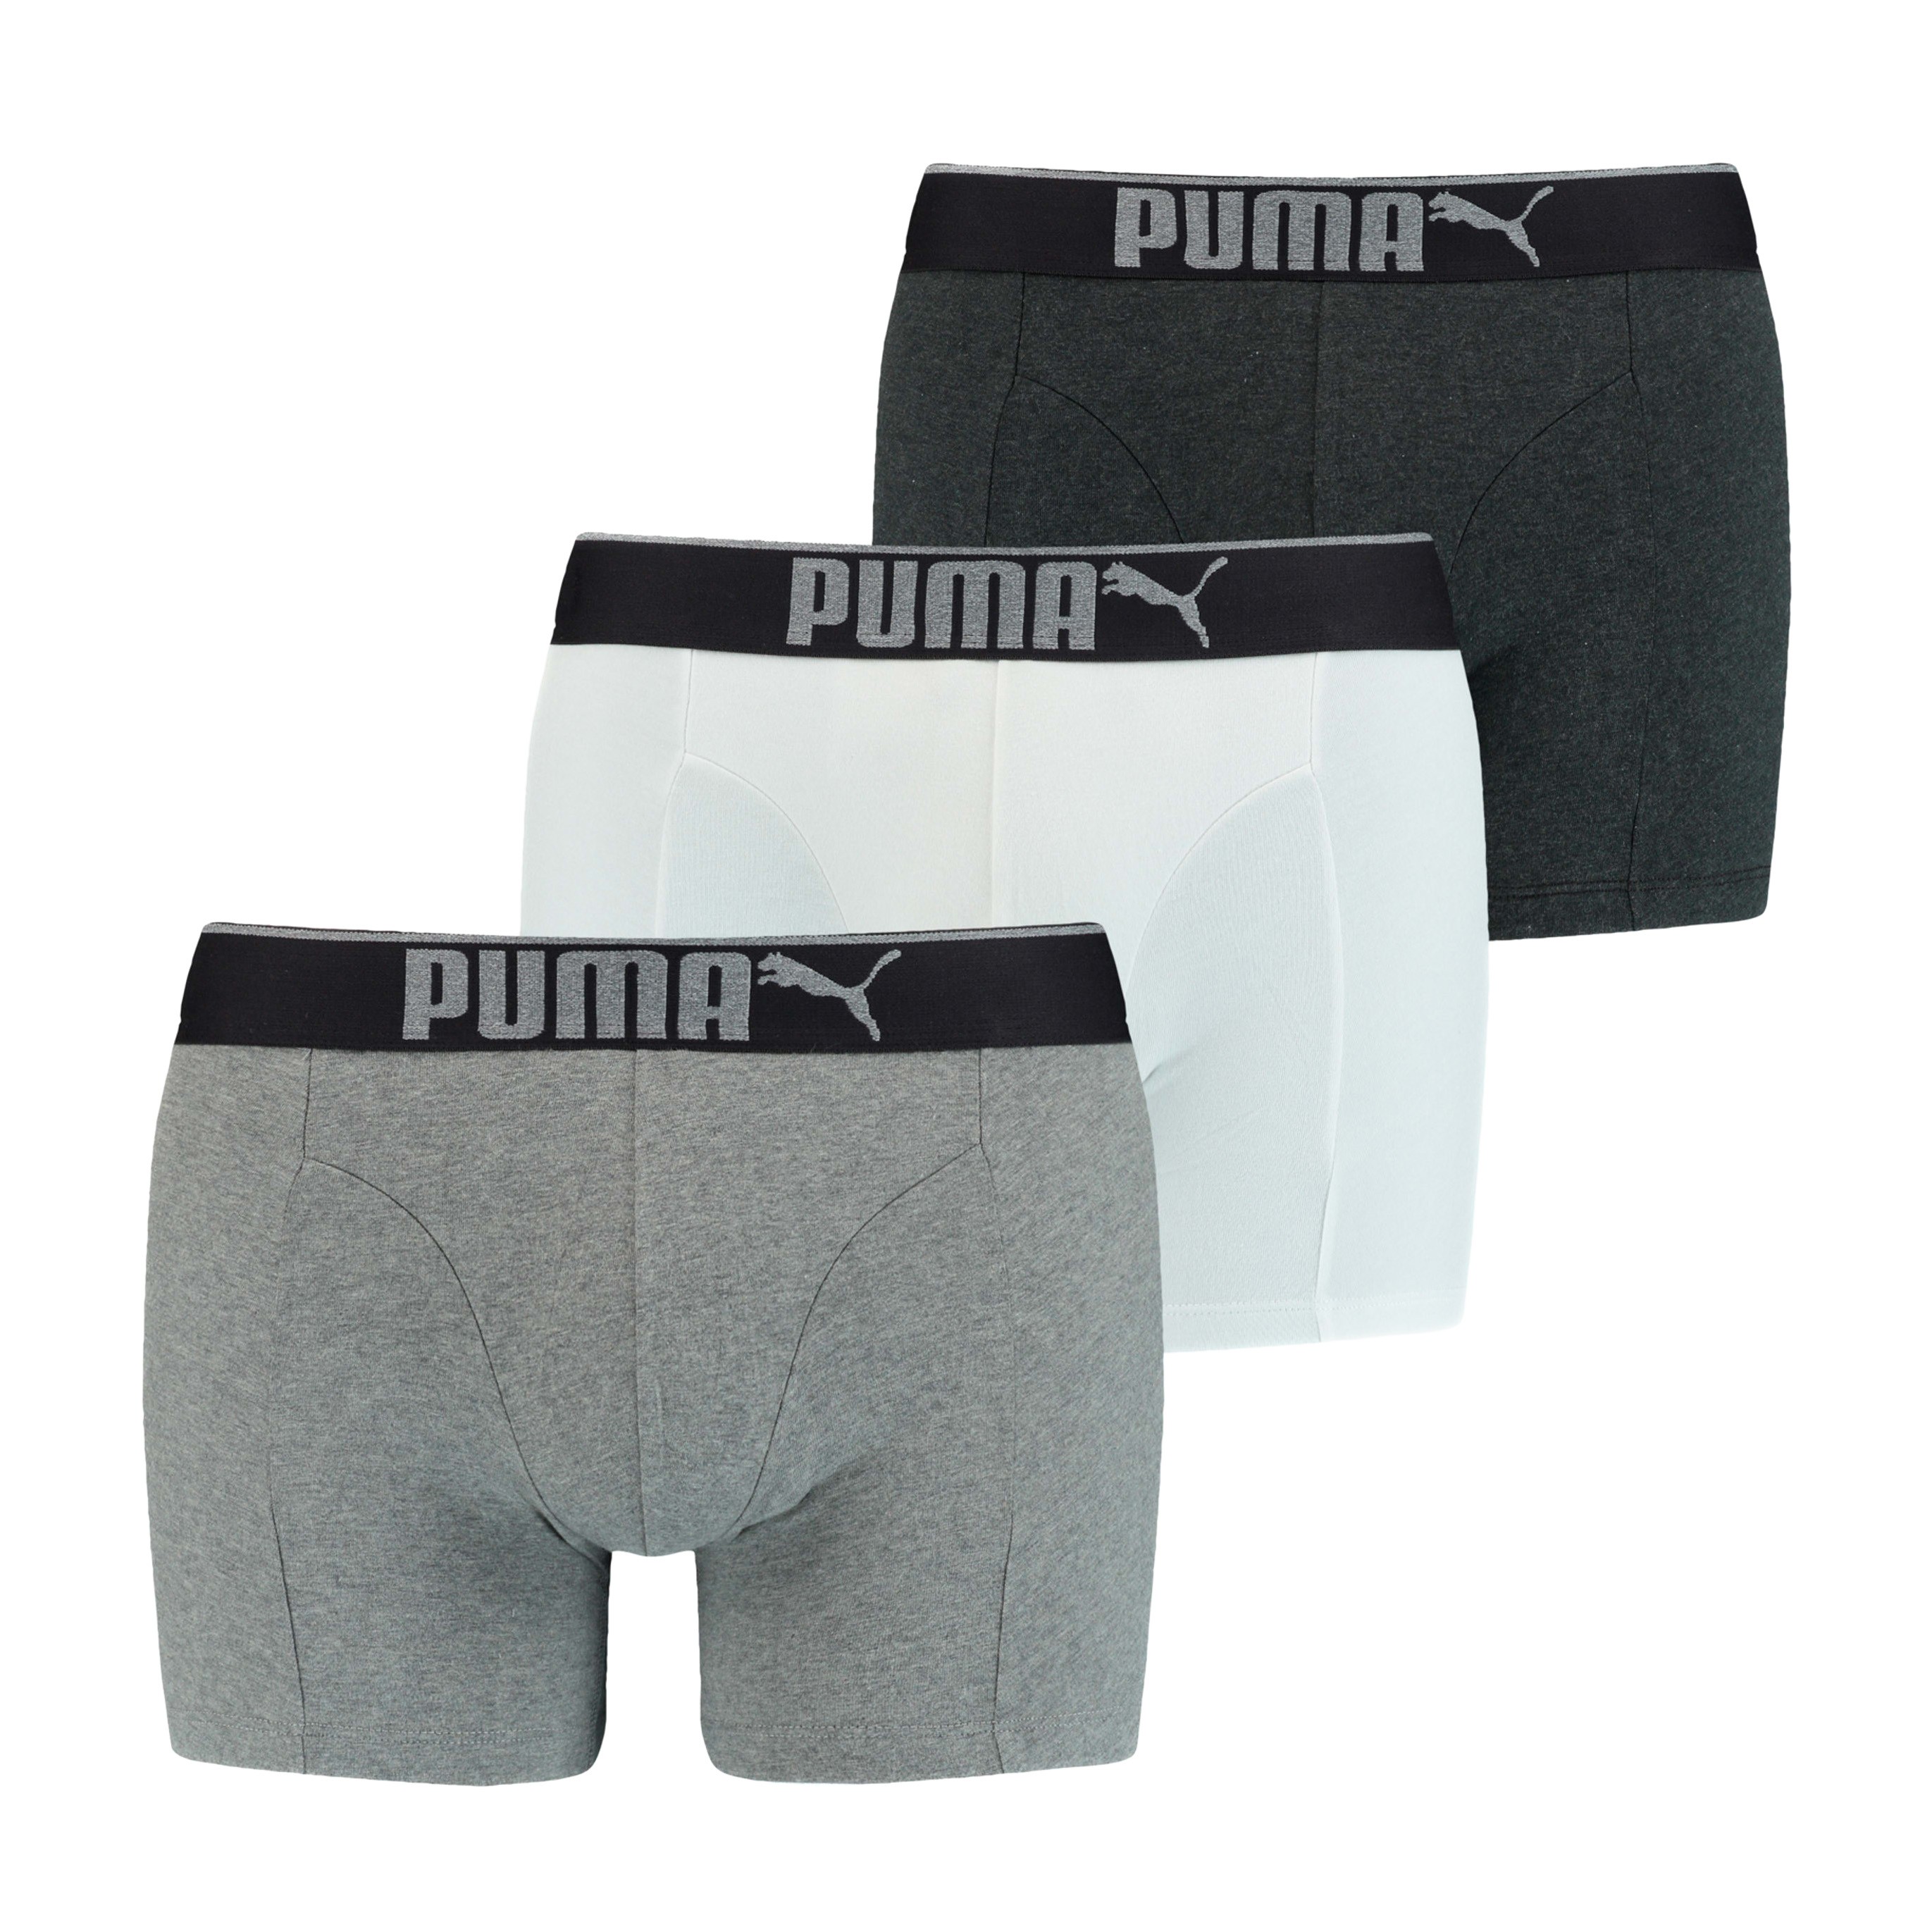 Lifestyle Sueded Cotton Shorts 3 Pack - white grey and black:...